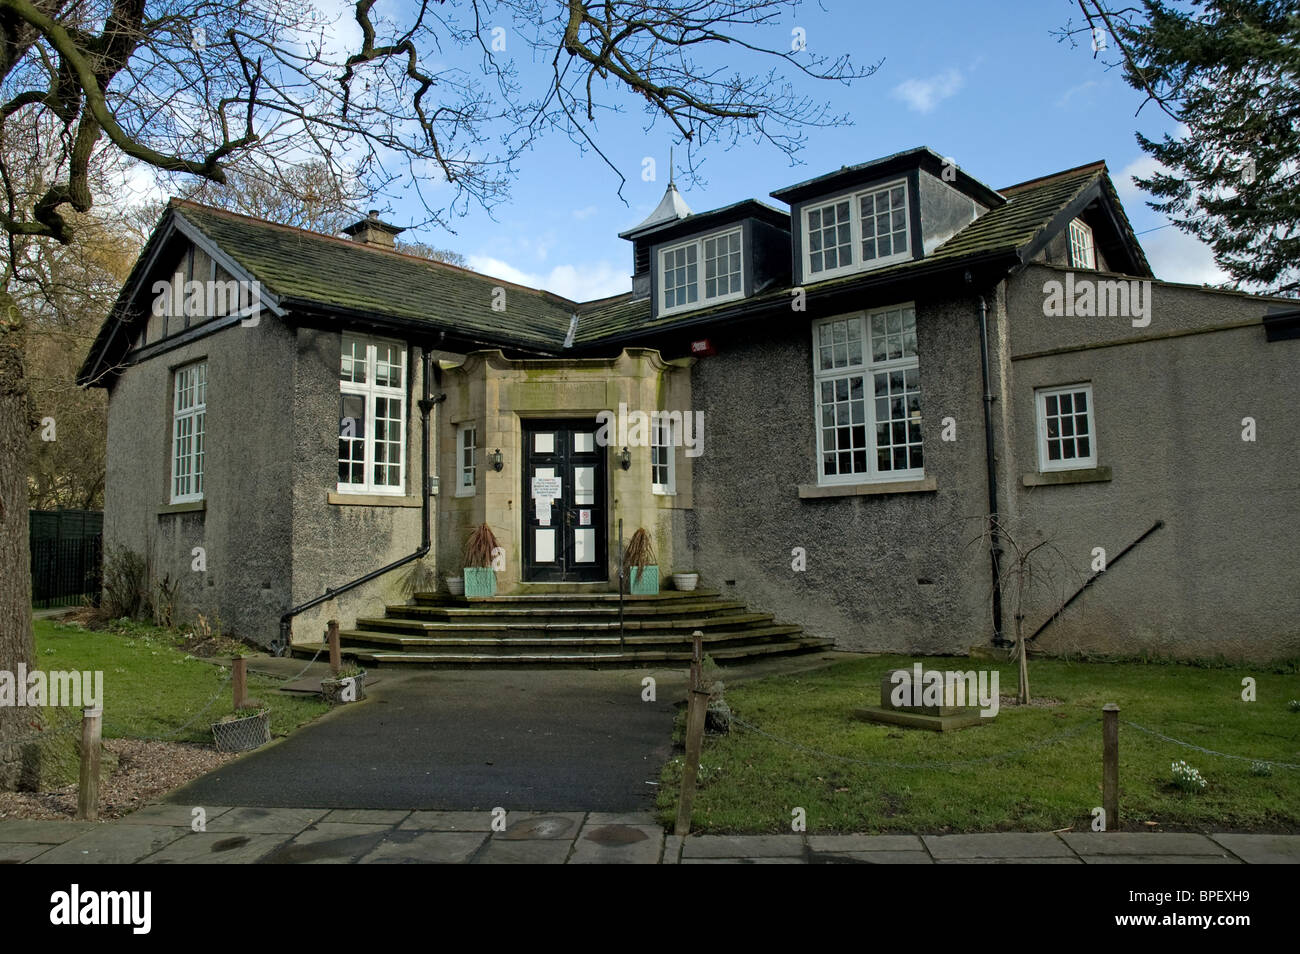 Village Hall in Arncliffe. Original location of ITV Soap Series Emmerdale, North Yorkshire Stock Photo